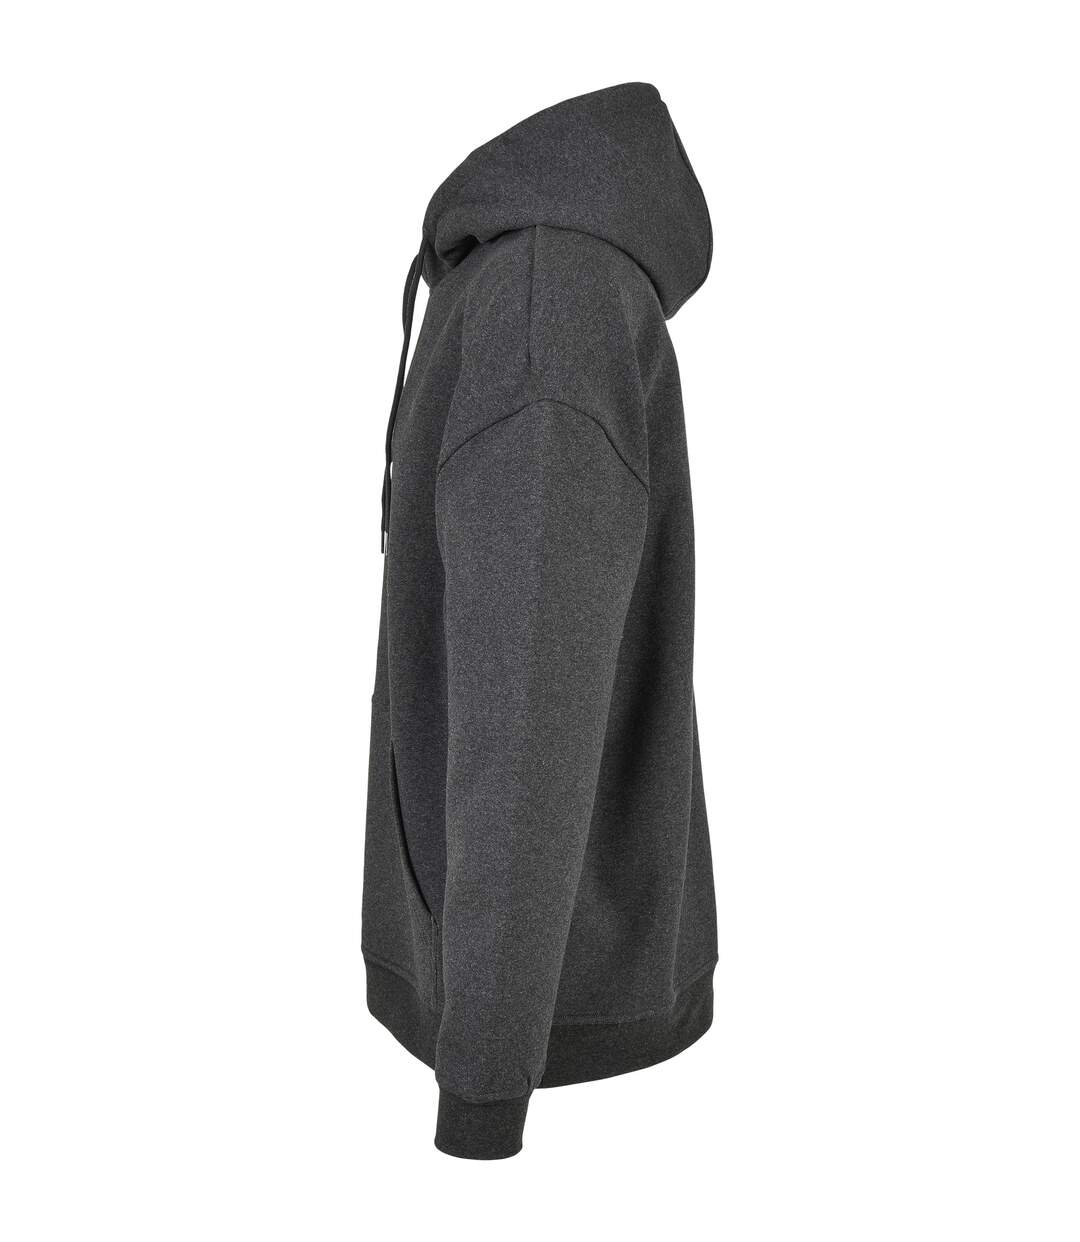 Build Your Brand Mens Basic Oversized Hoodie (Charcoal)